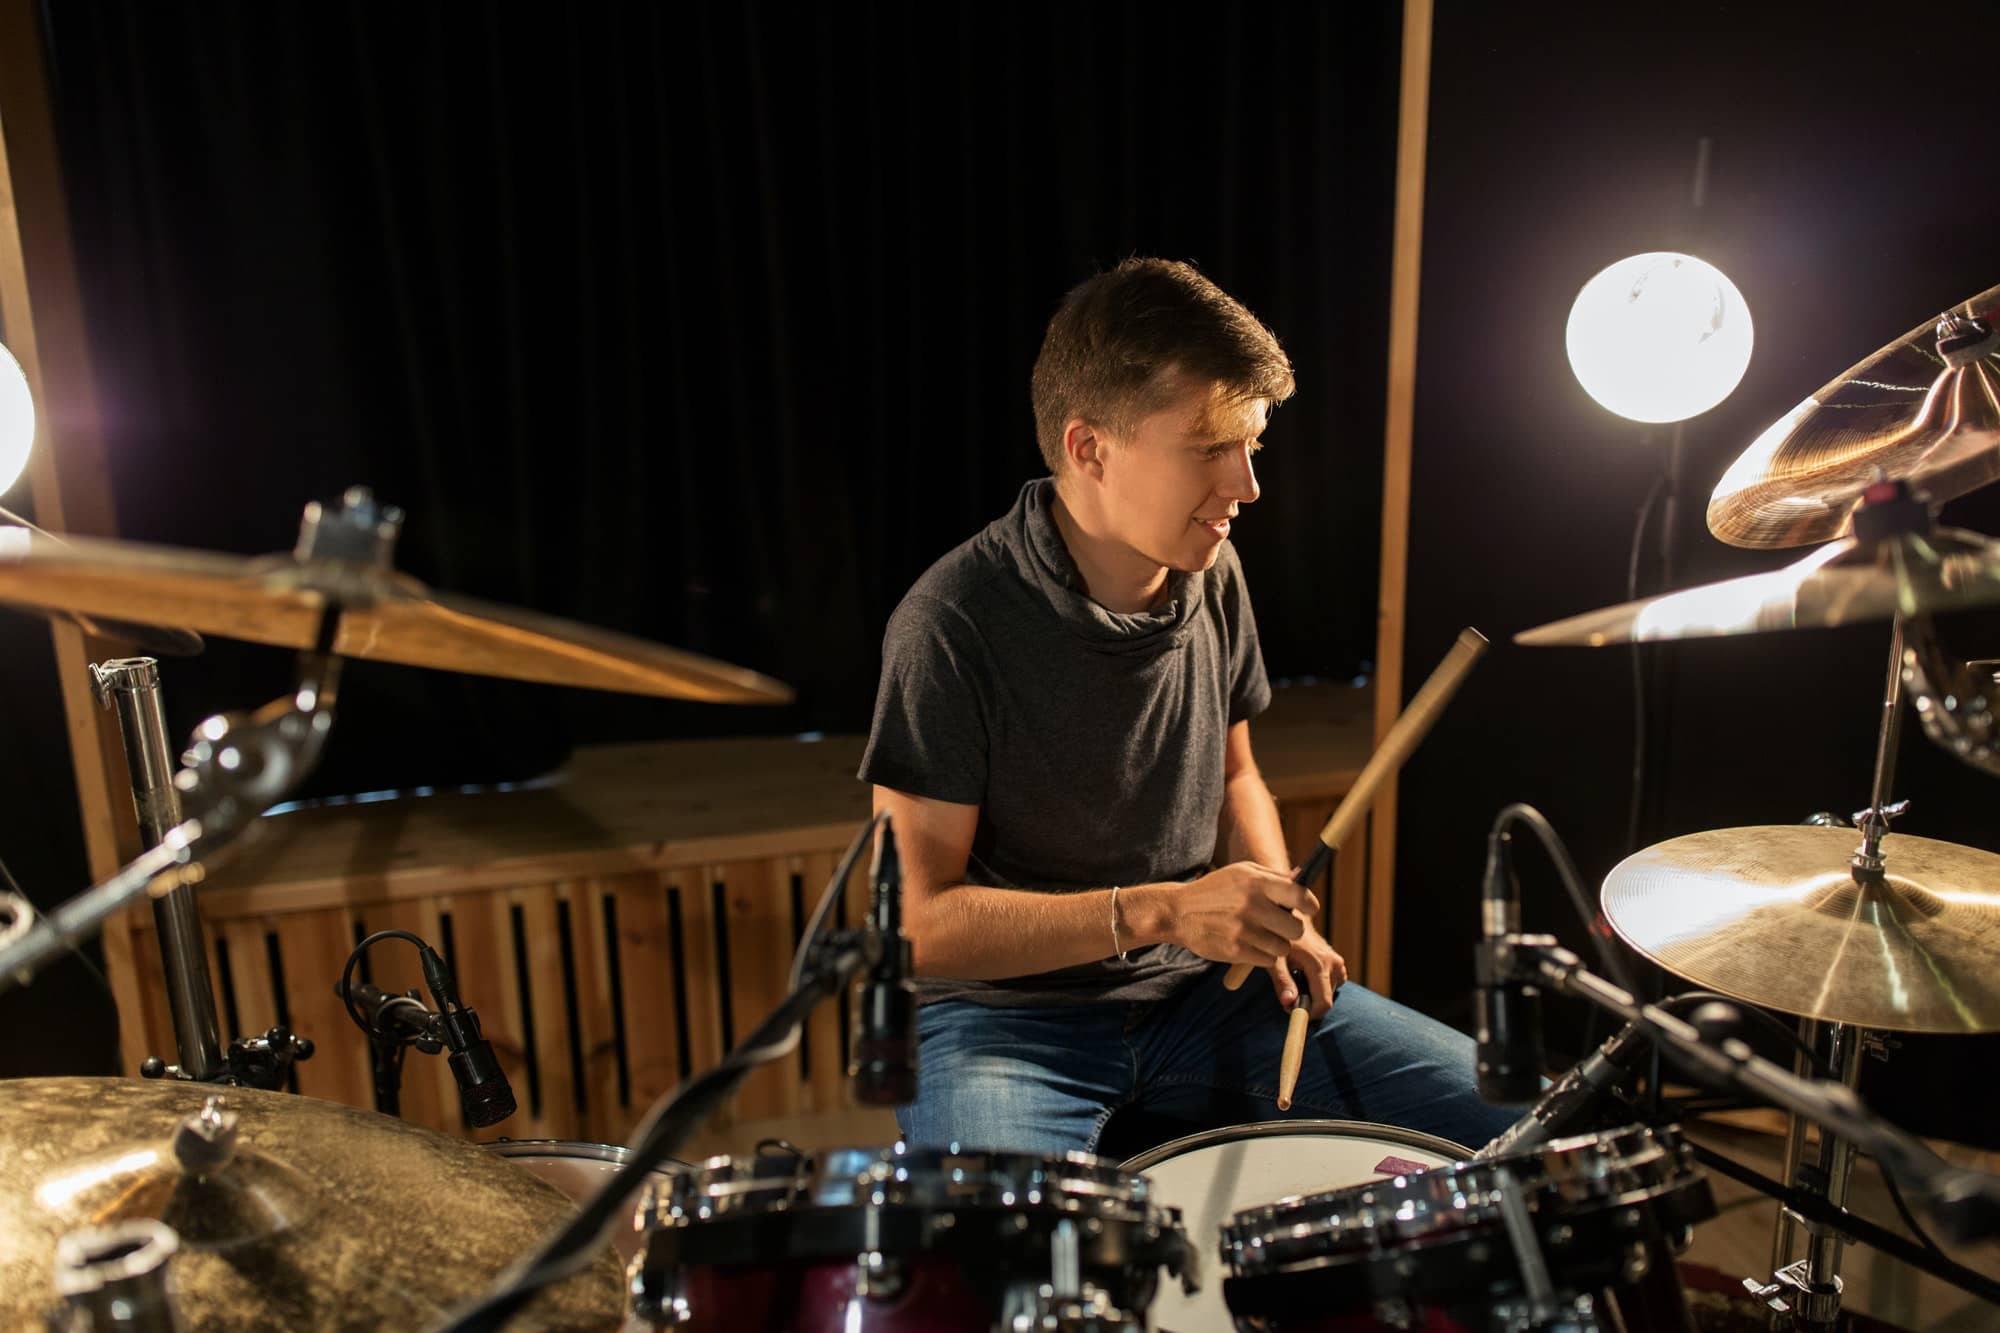 Excellent drum lessons for kids & adults in Bowmanville or online